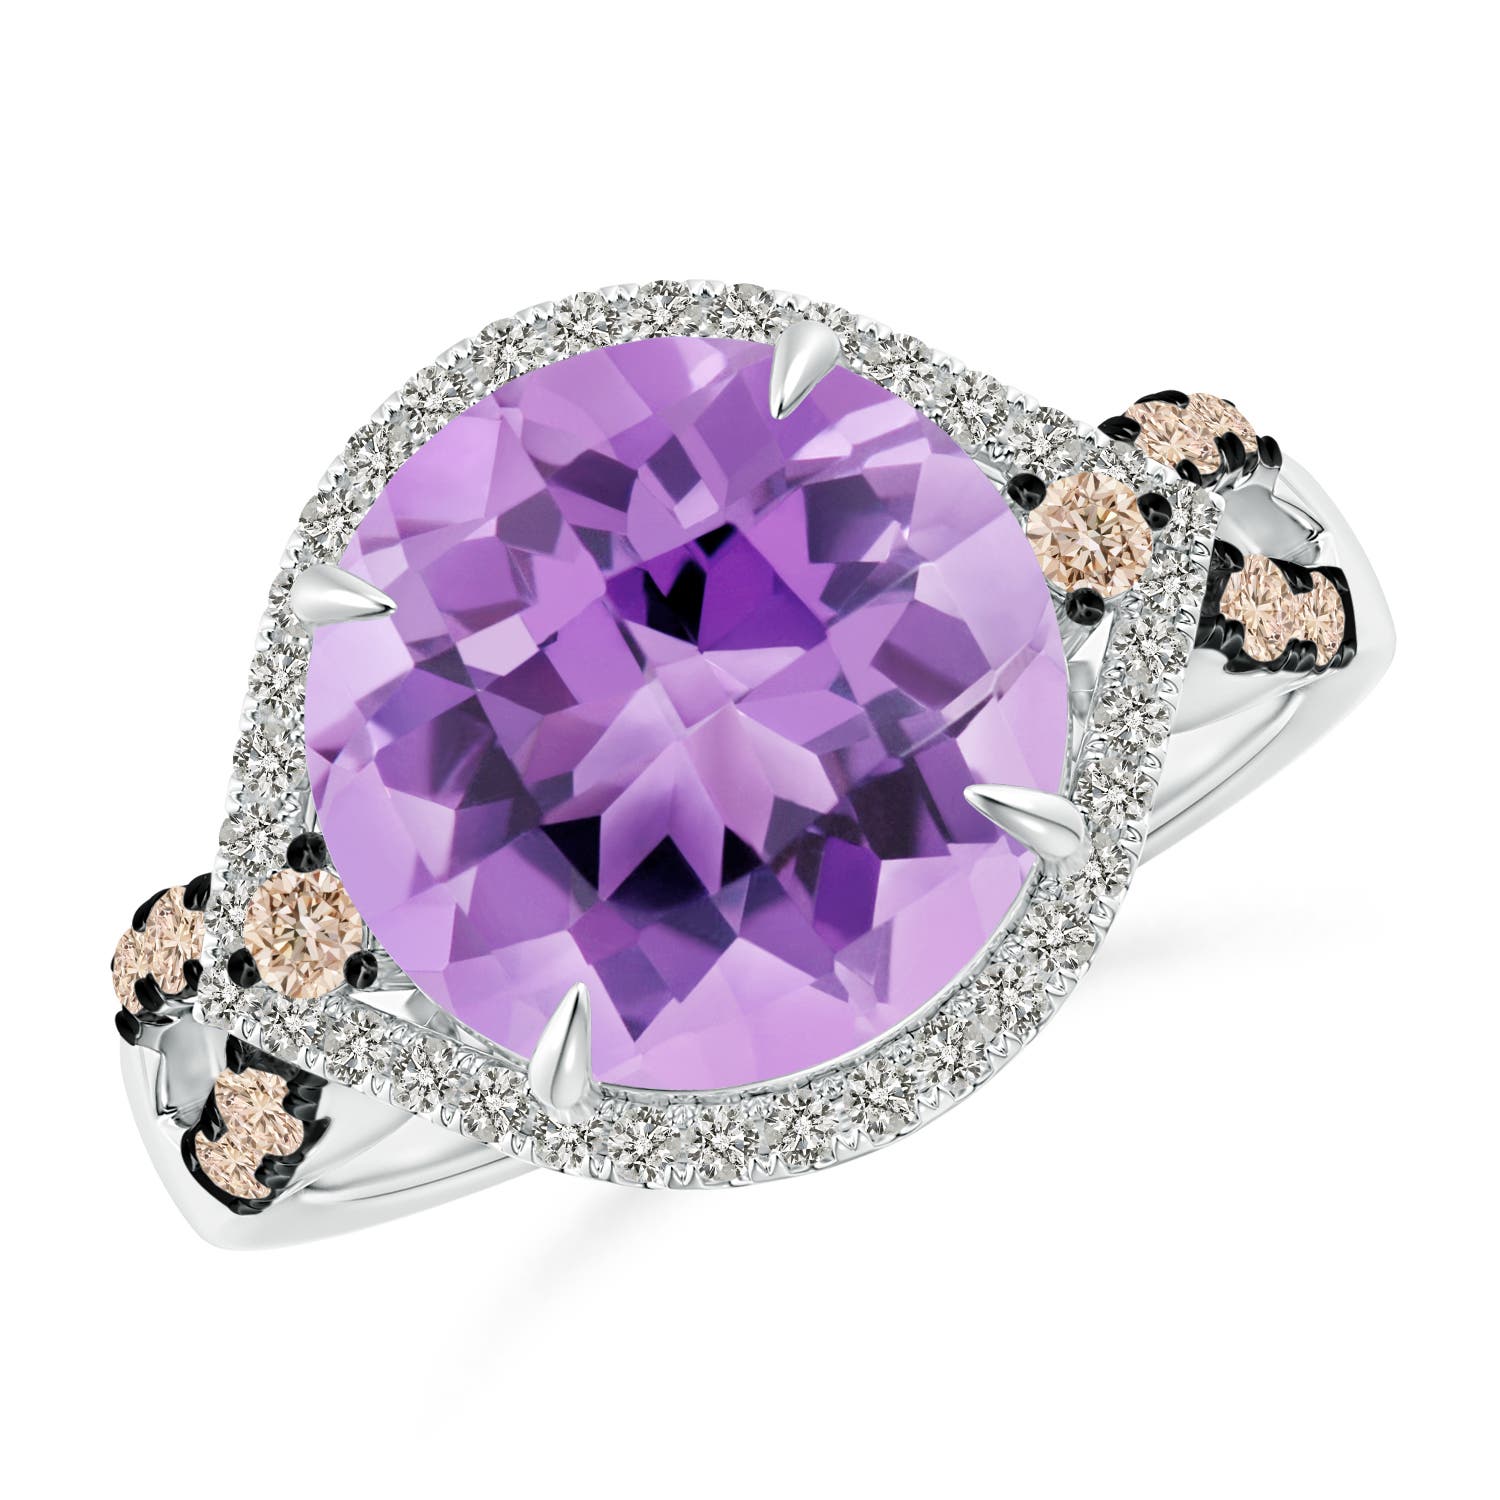 A - Amethyst / 4.64 CT / 14 KT White Gold